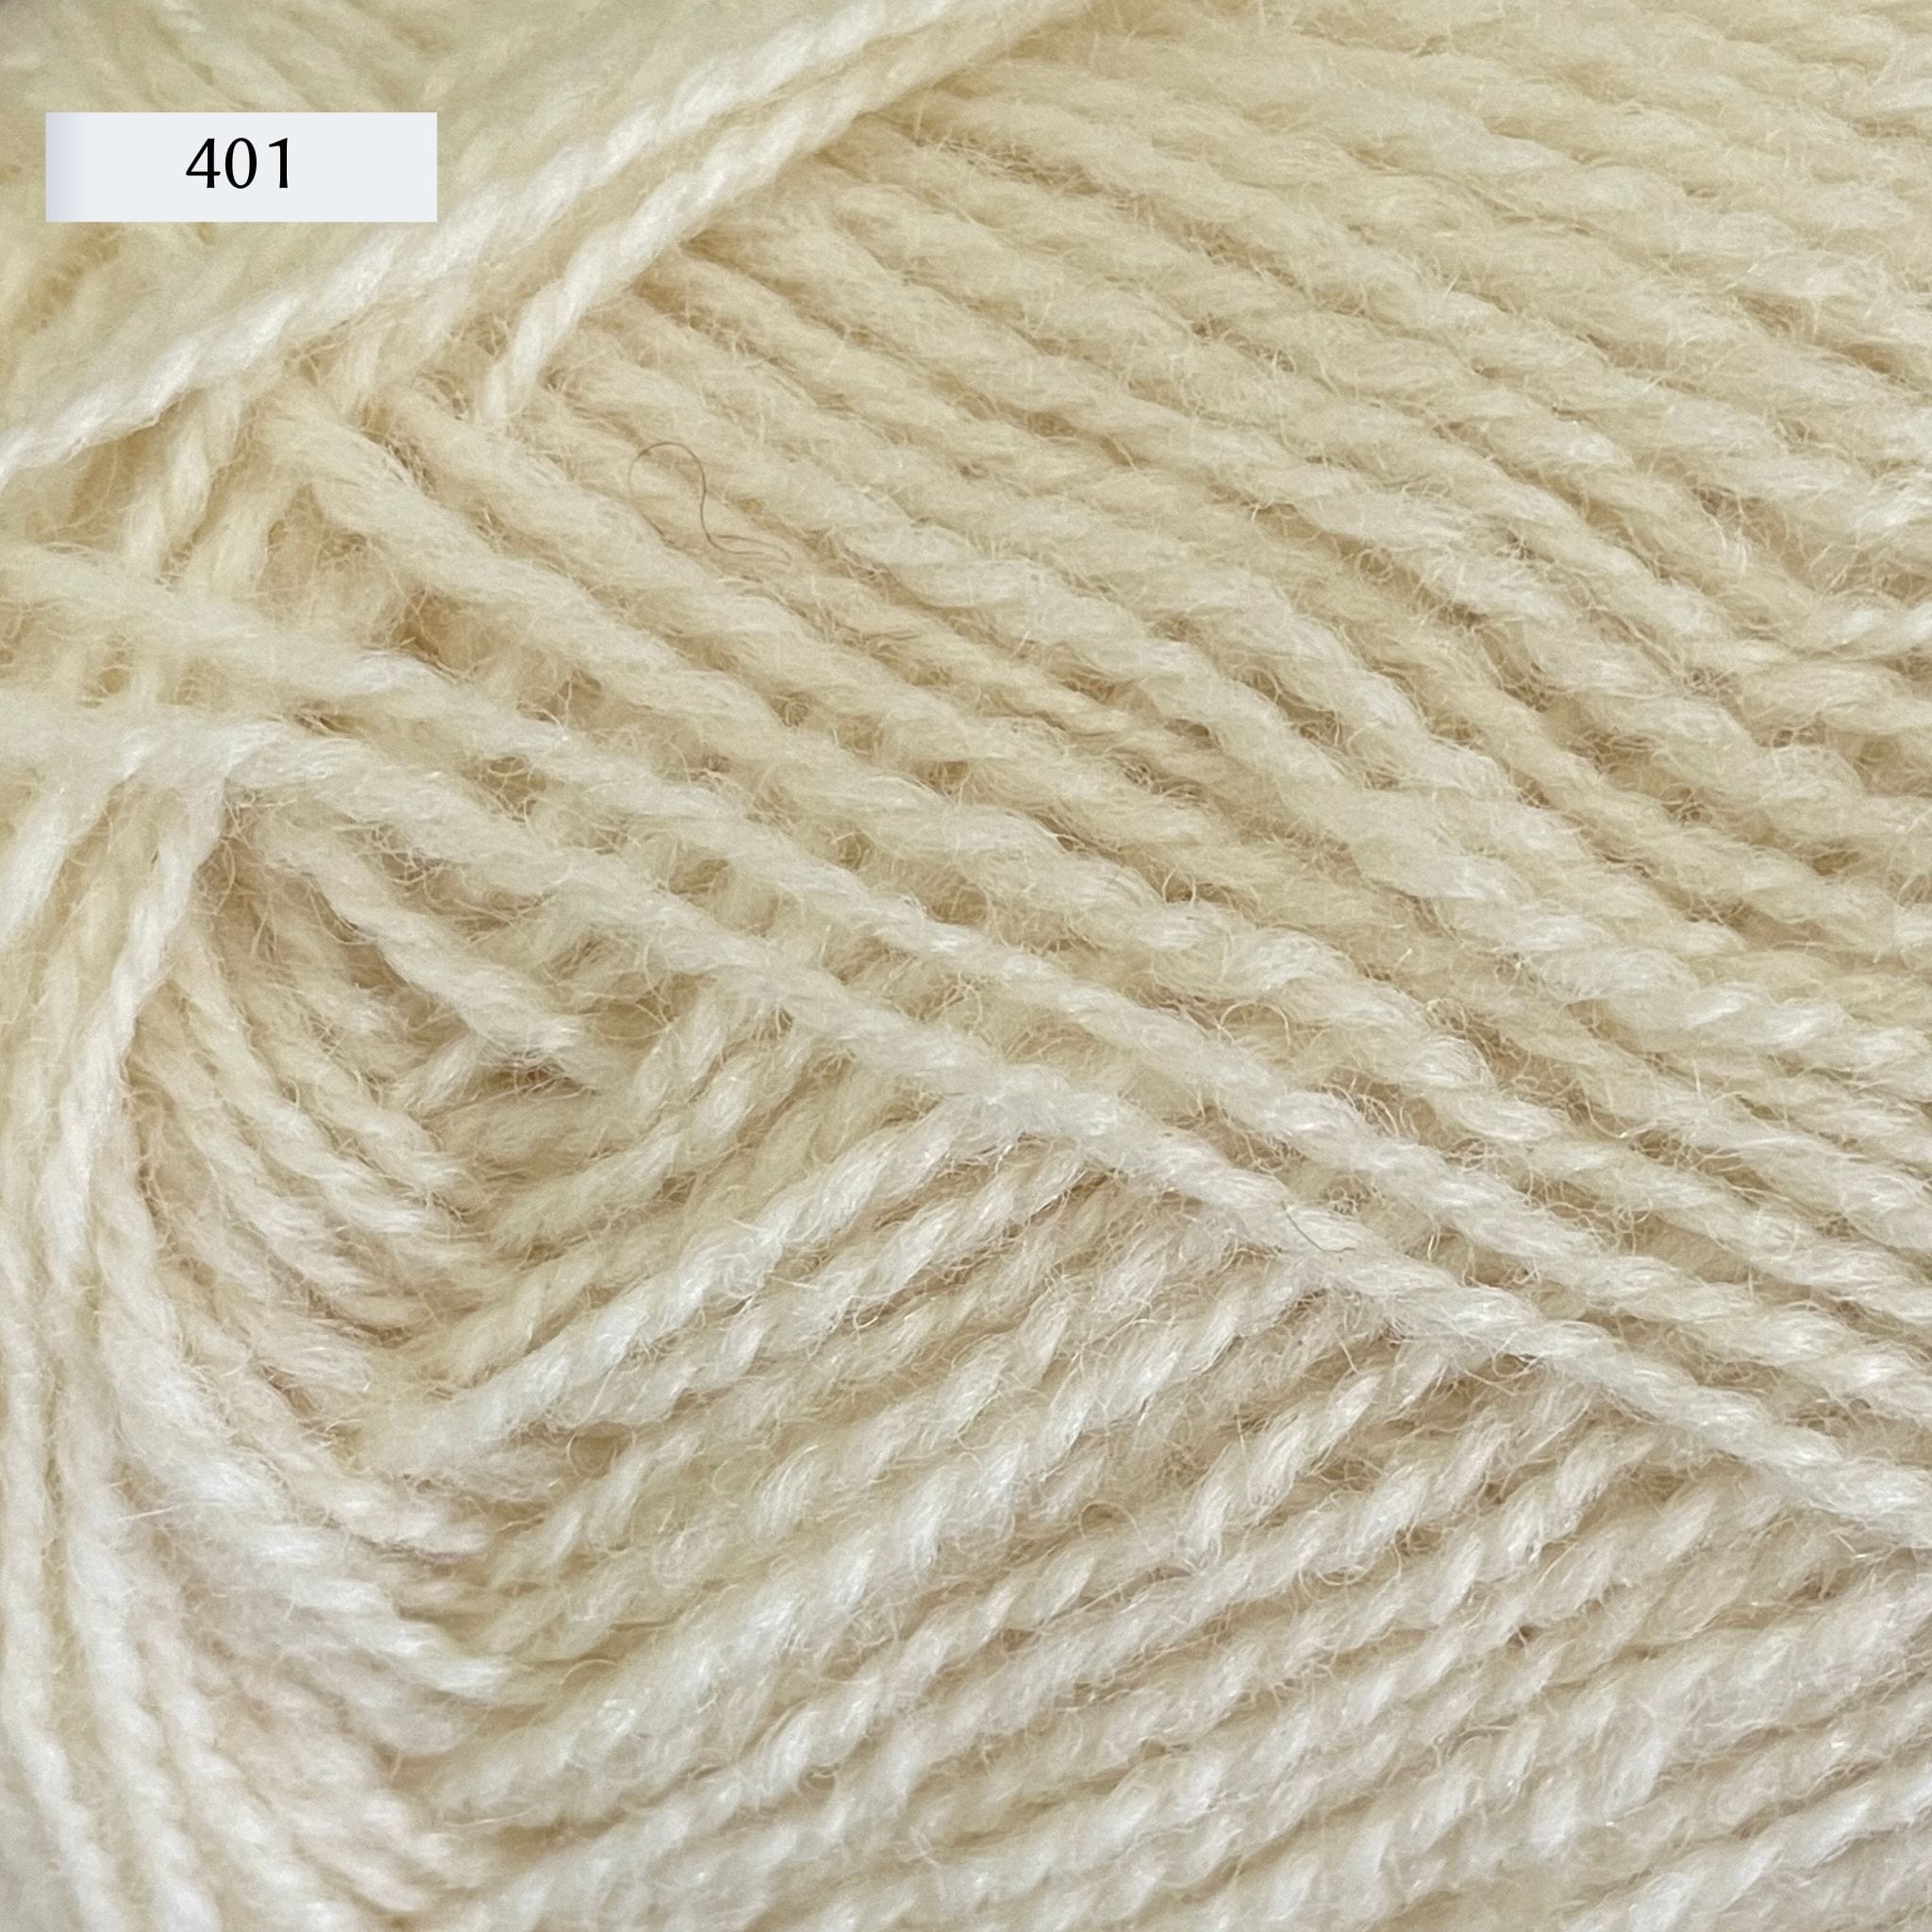 Rauma Gammelserie 2ply wool yarn, fingering weight, in color 401, natural white